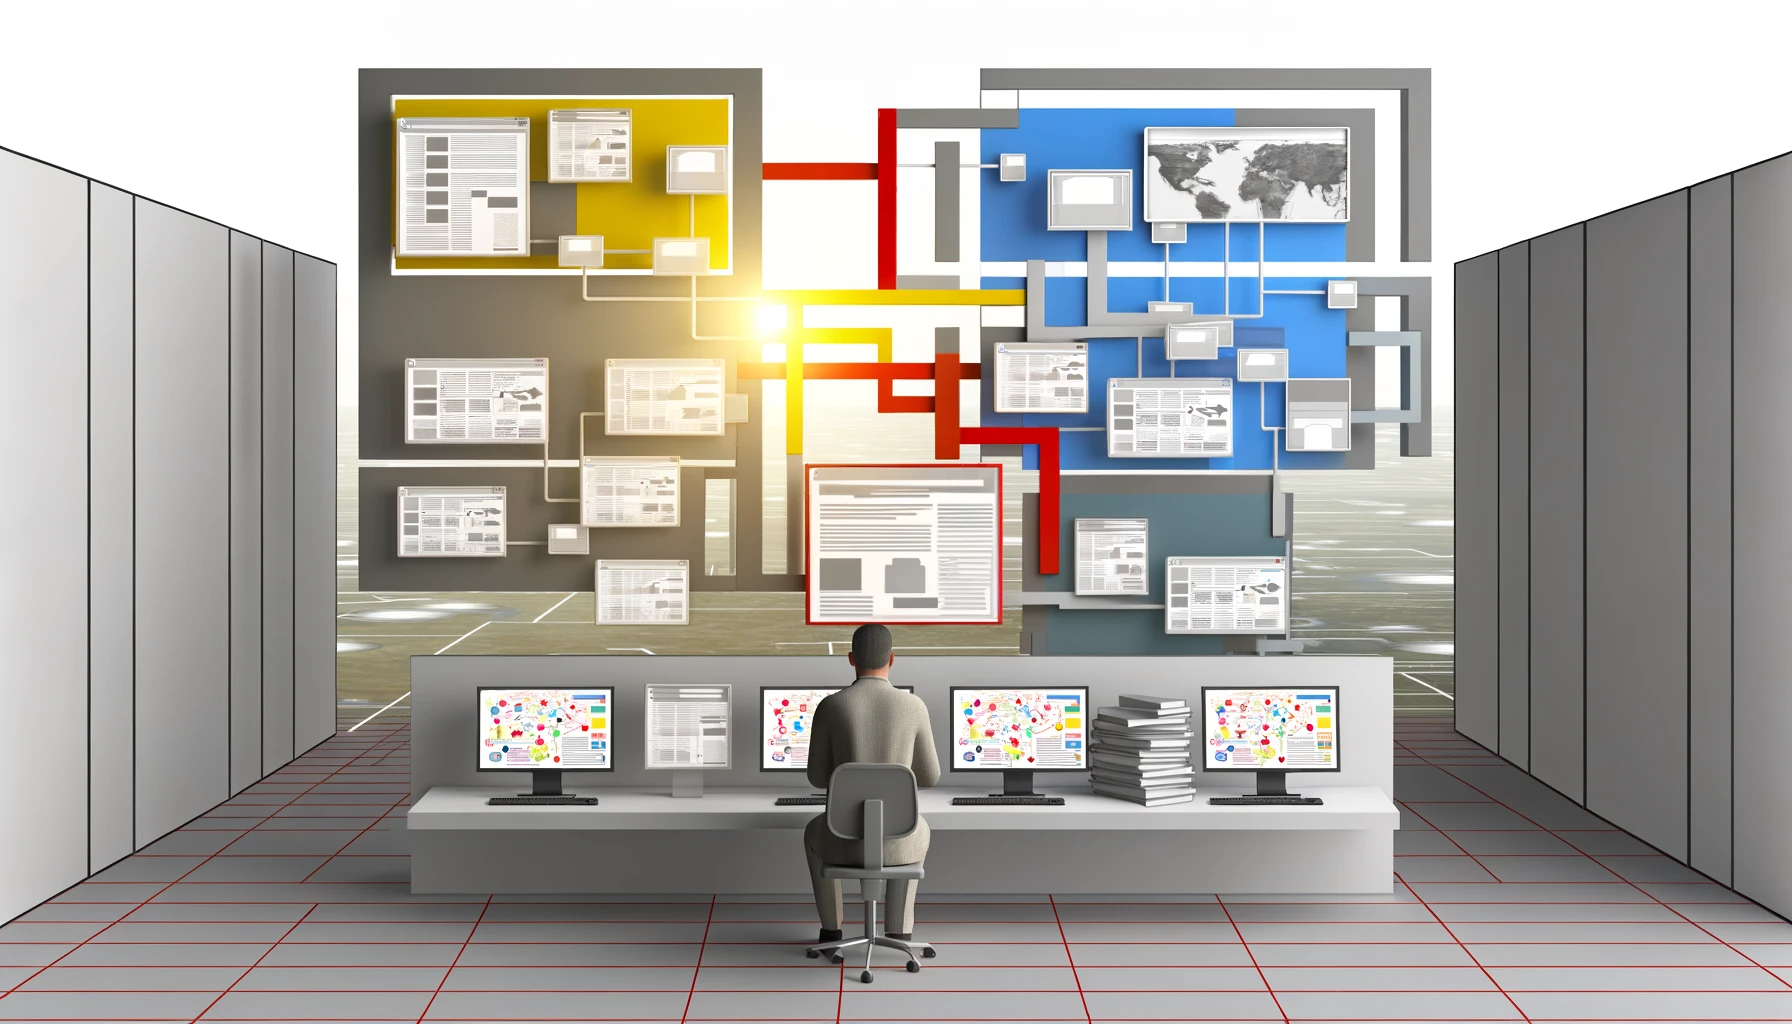 This image presents a modern digital landscape where an individual exemplifies mastery over their digital environment. The setting is a realistic workstation, where the individual is surrounded by multiple screens displaying organized data and content. These screens visualize structured information pathways, connecting various pieces of content, symbolizing the individual's adeptness at navigating and controlling their digital realm. The use of light gray, dark gray, bright red, yellow, and blue accentuates the seamless integration of technology into daily life, highlighting a harmonious balance between technological advancement and accessibility. This portrayal captures the essence of digital mastery in today's context, showcasing practical empowerment and active participation in the digital world, steering away from the futuristic to emphasize the attainable and the now.